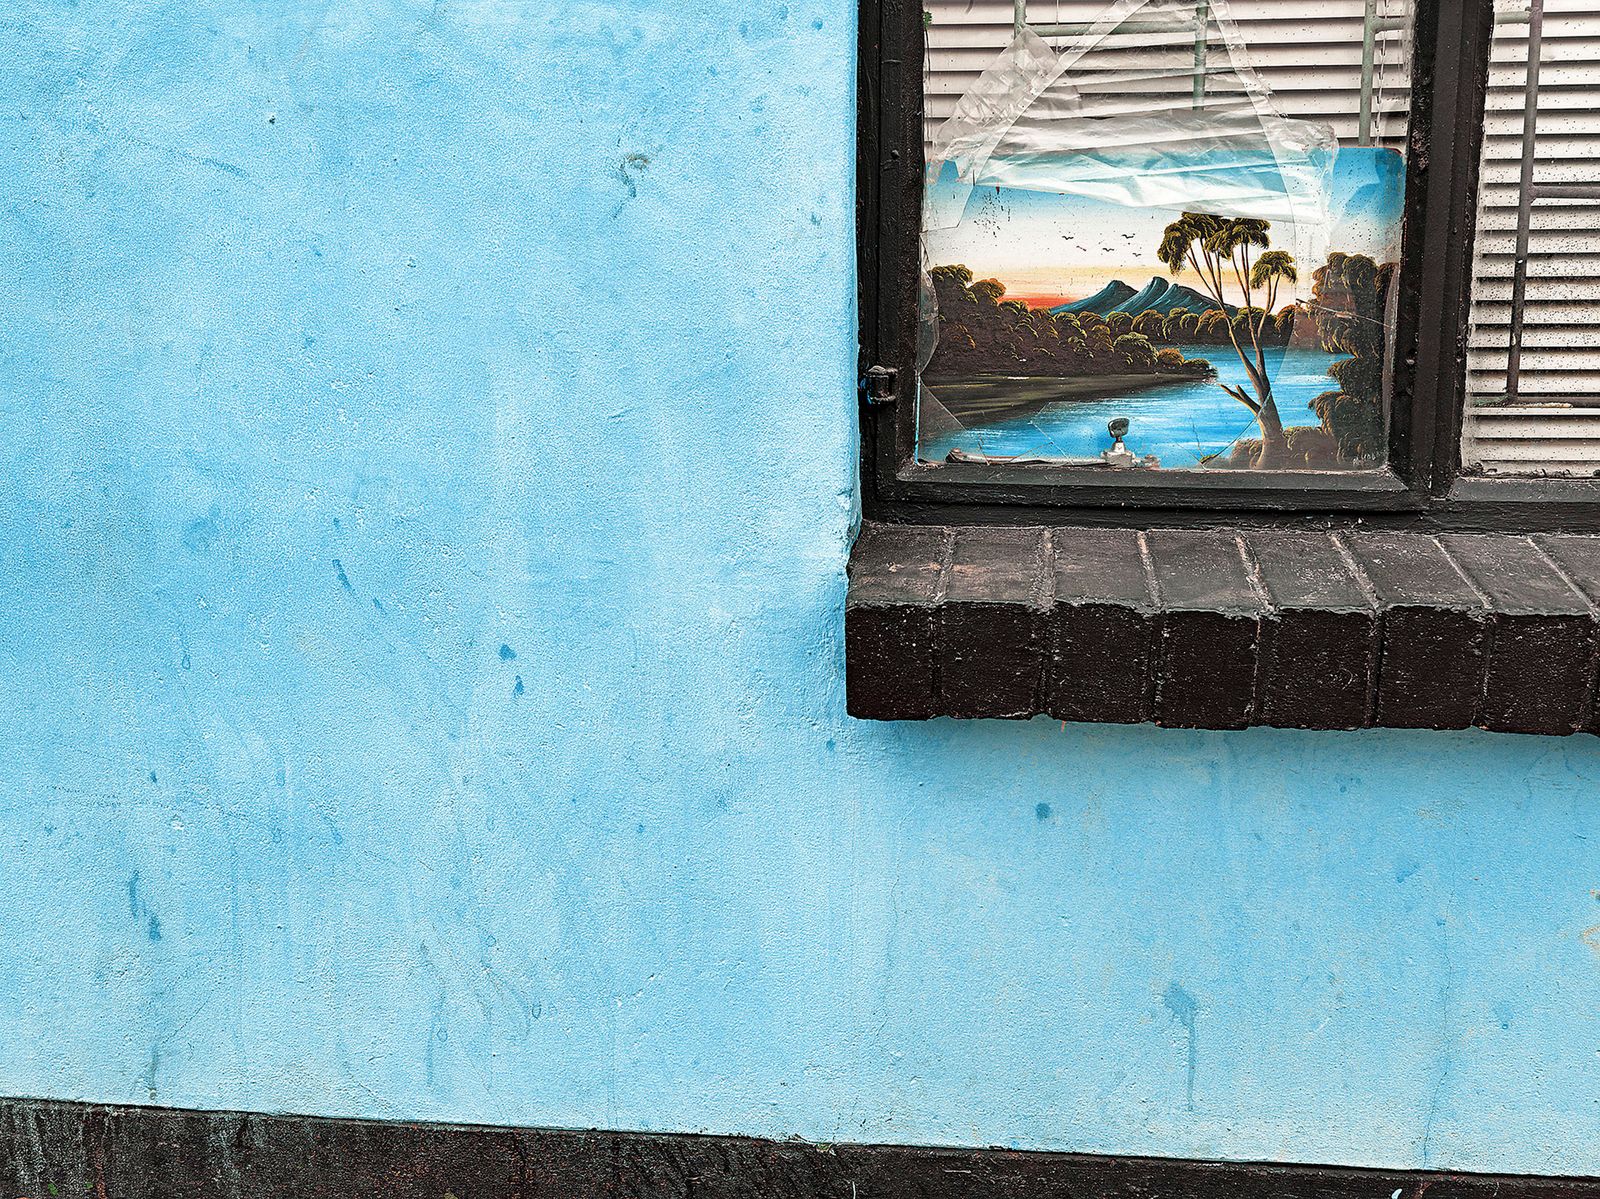 © Graeme Williams - Upington, South Africa. 2011. A cheap painting is used to block a broken window.